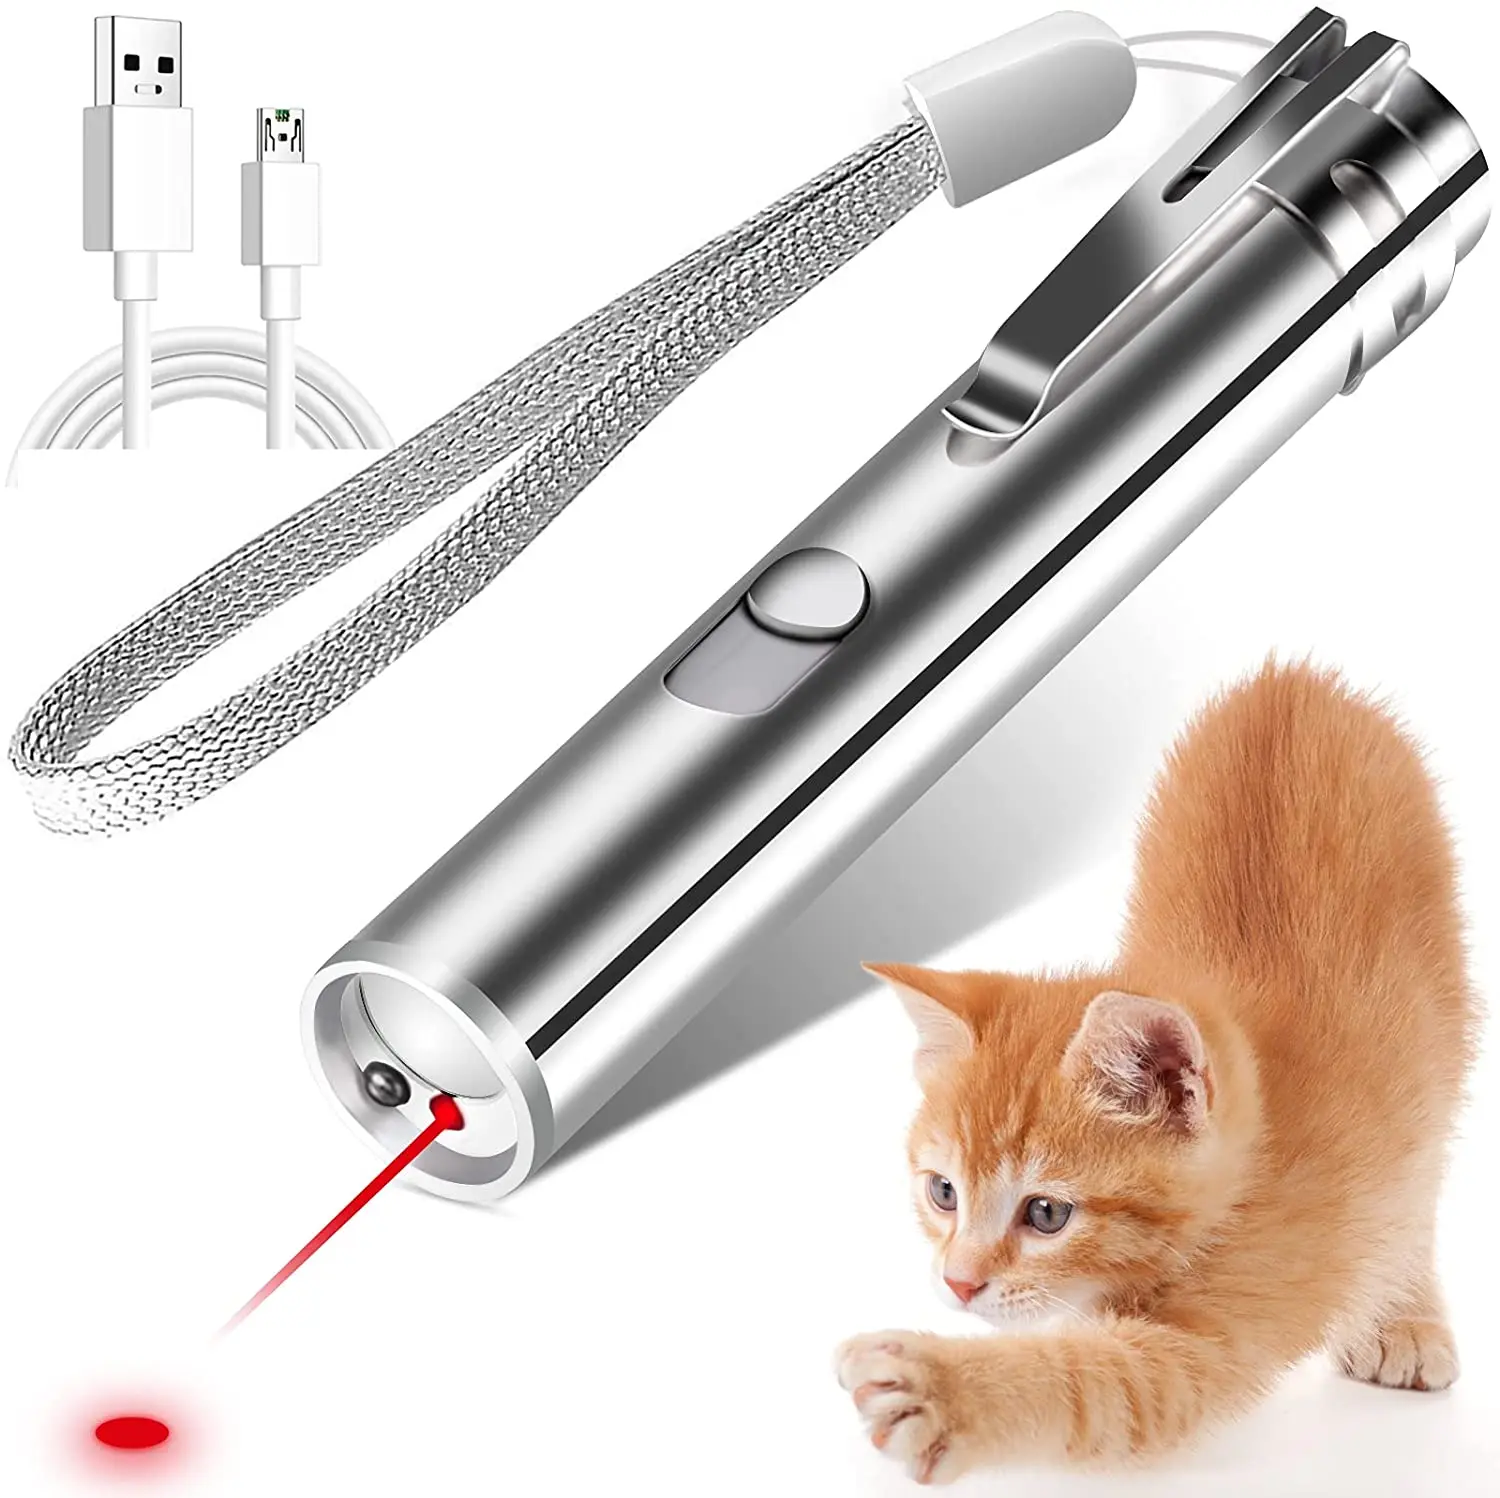 

Cat Toys for Indoor Cat and Dog, Long Range Projection Playpen for Kitten Chaser Tease Stick Training Exercise, USB Recharge